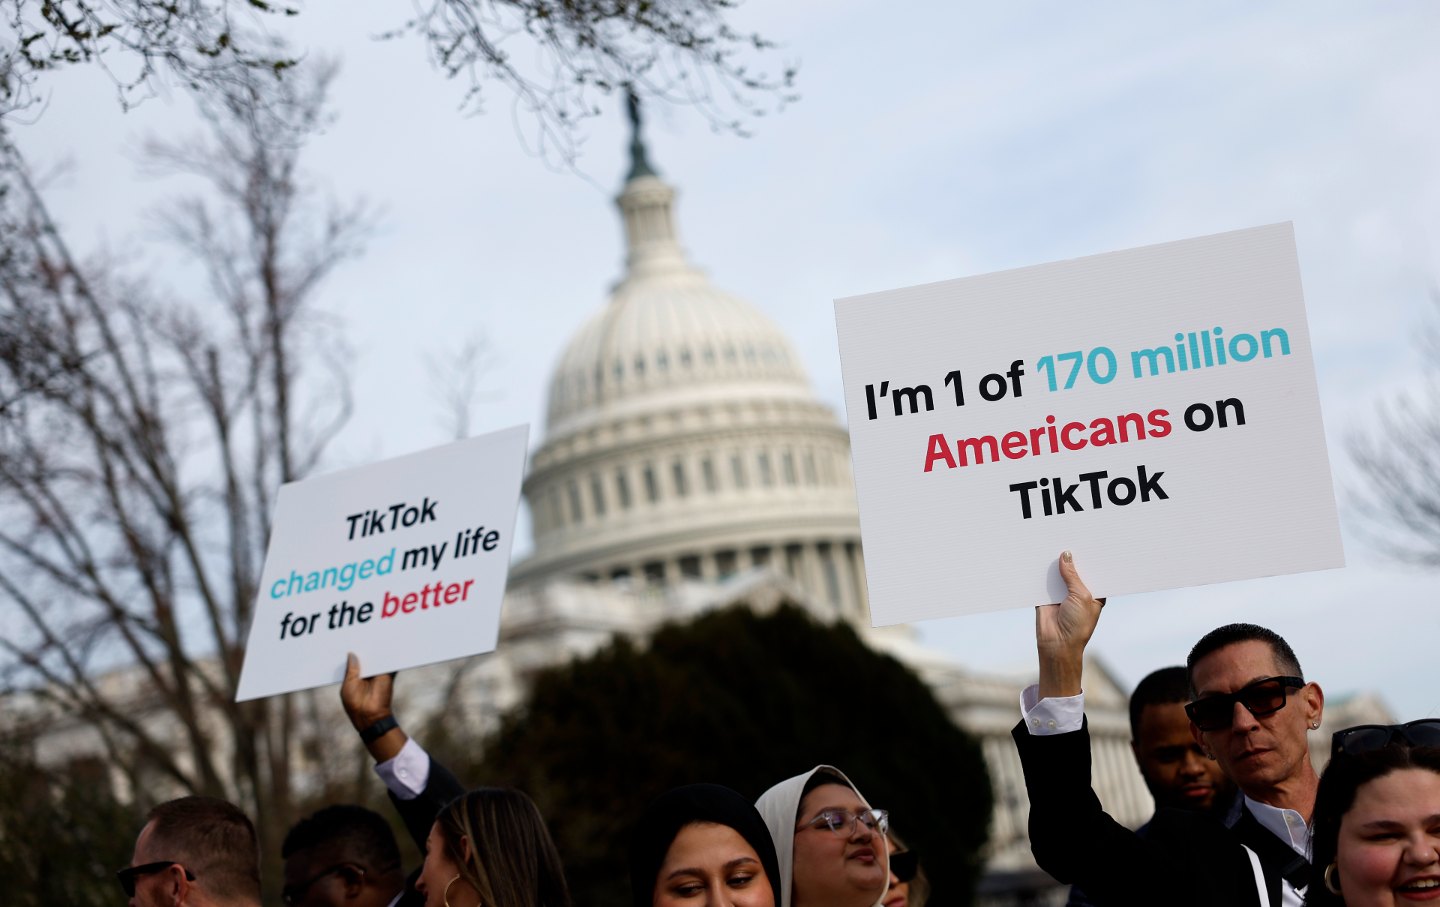 Proesters in front of the Capitol building with signs protesting the bill to force the sale of TikTok to an American-owned company. Signs read "I'm one of 170 million Americans on TikTok" and "TikTok changed my life for the better."